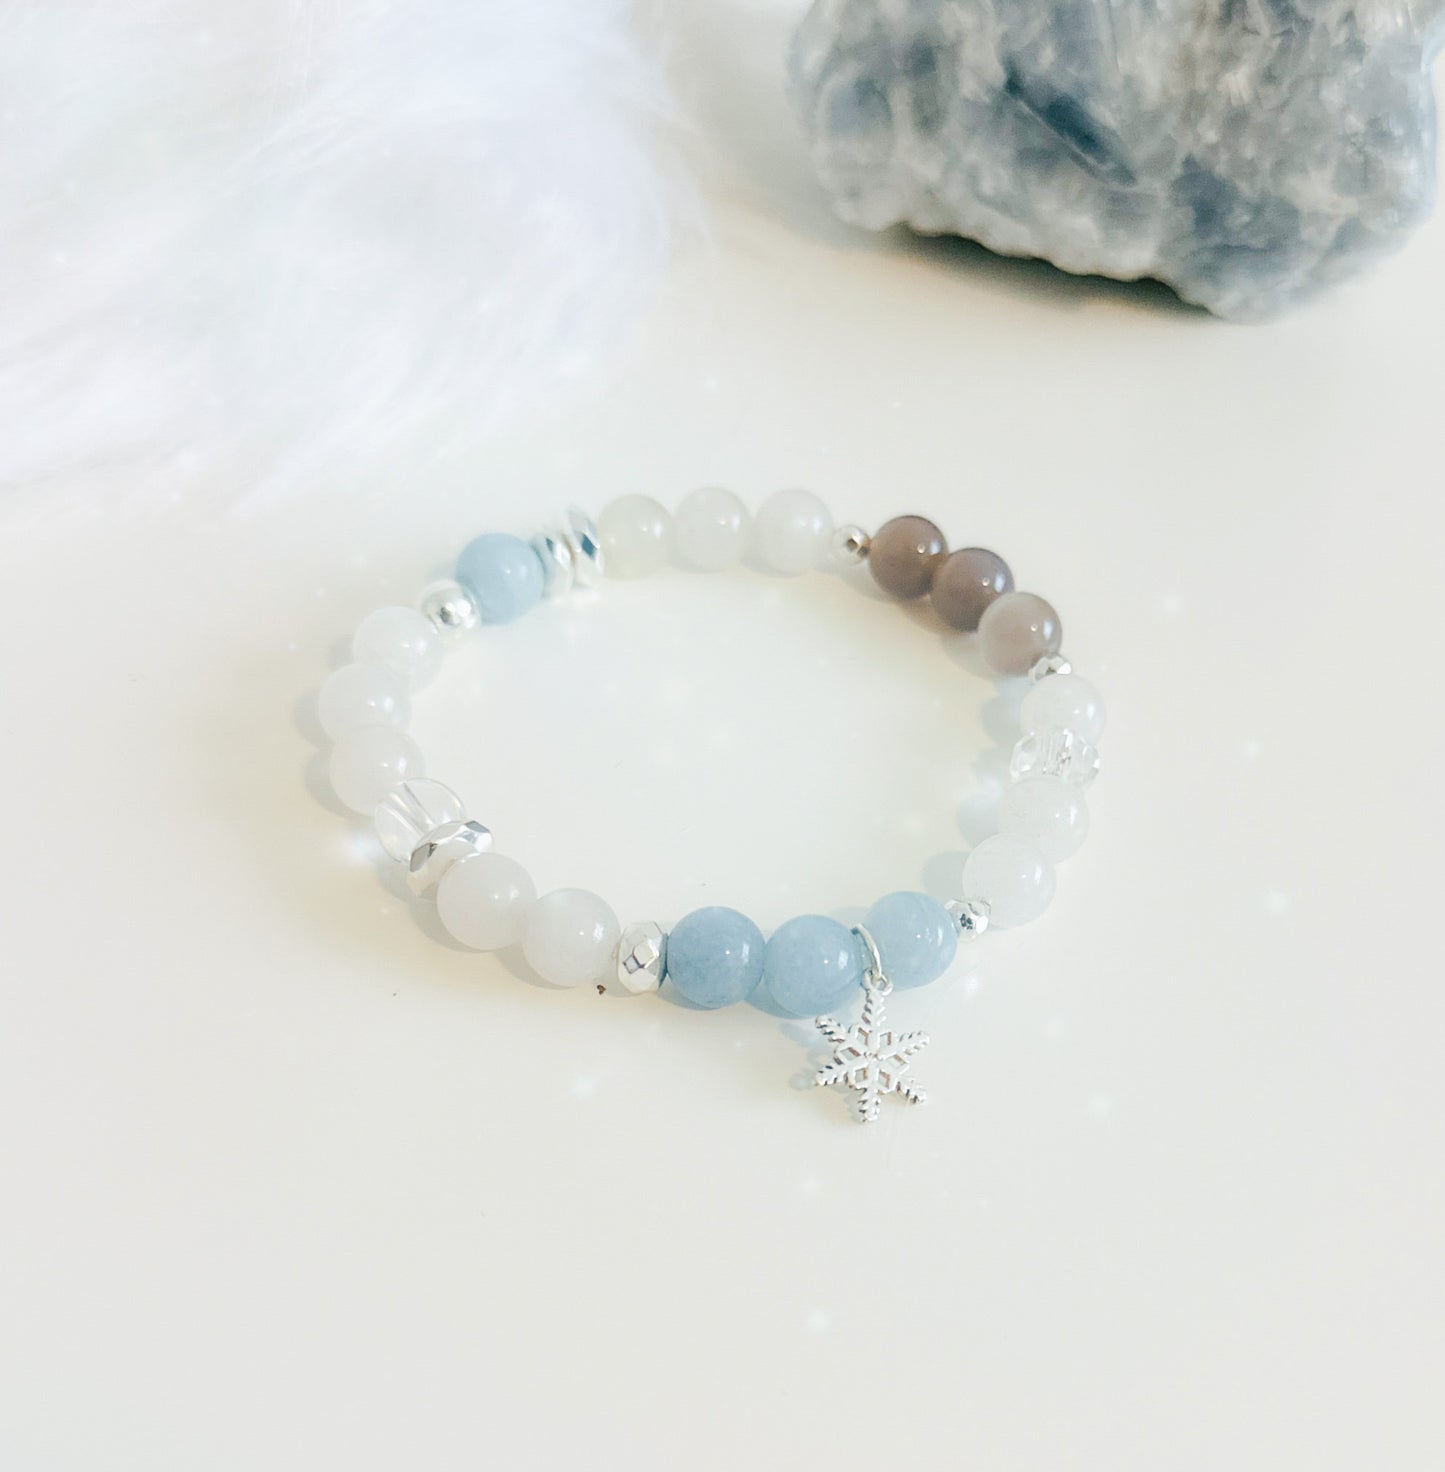 Snowflake Gemstone Bracelet Set, meticulously crafted with Aquamarine, White Jade, and a sterling silver snowflake charm. ❄️